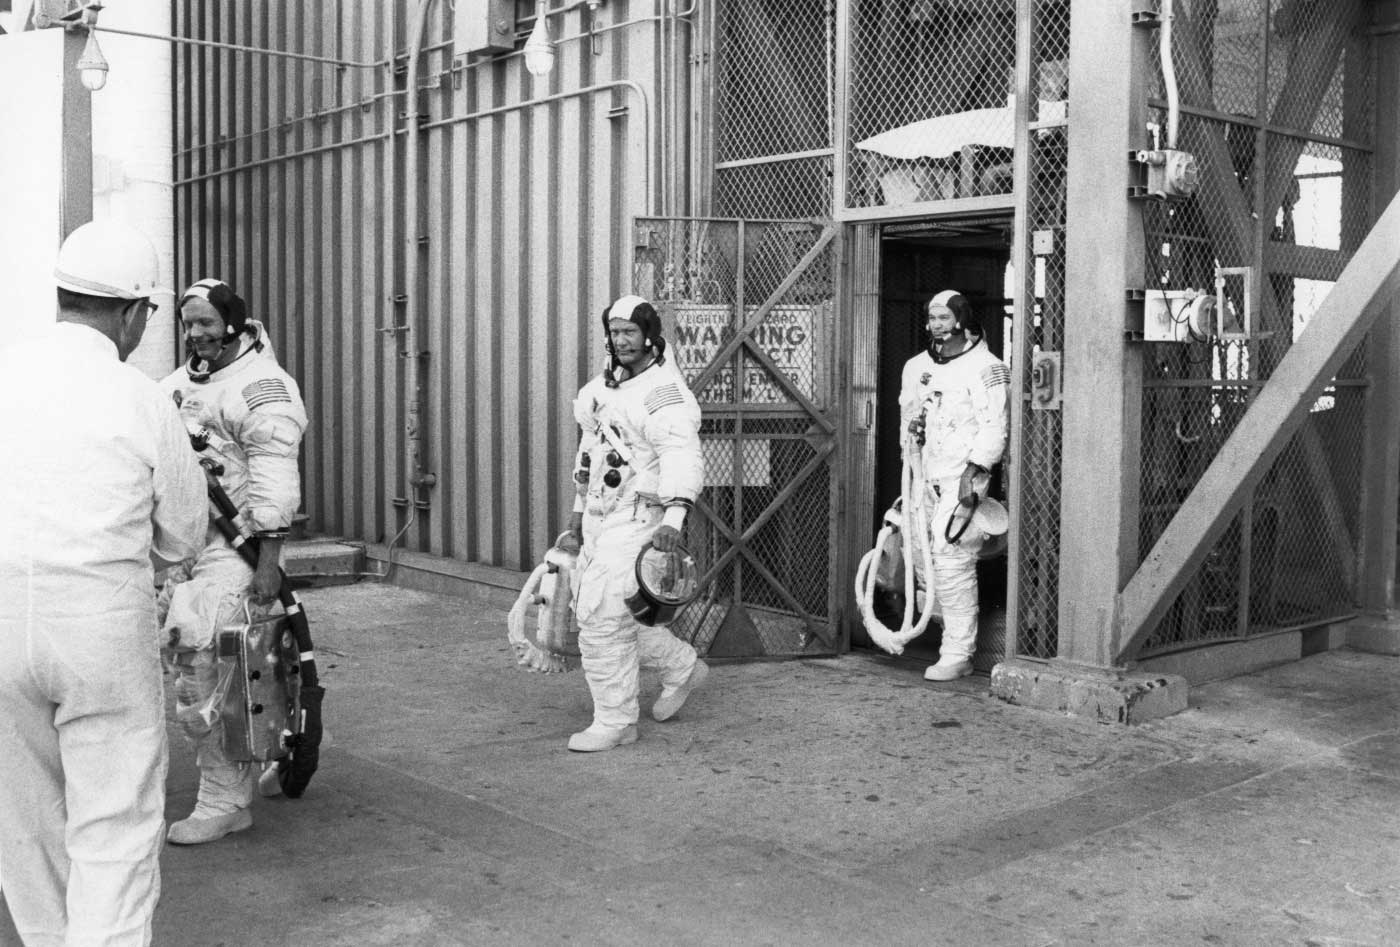 the apollo 11 crew walks to the van to take them to the launch pad (CK)